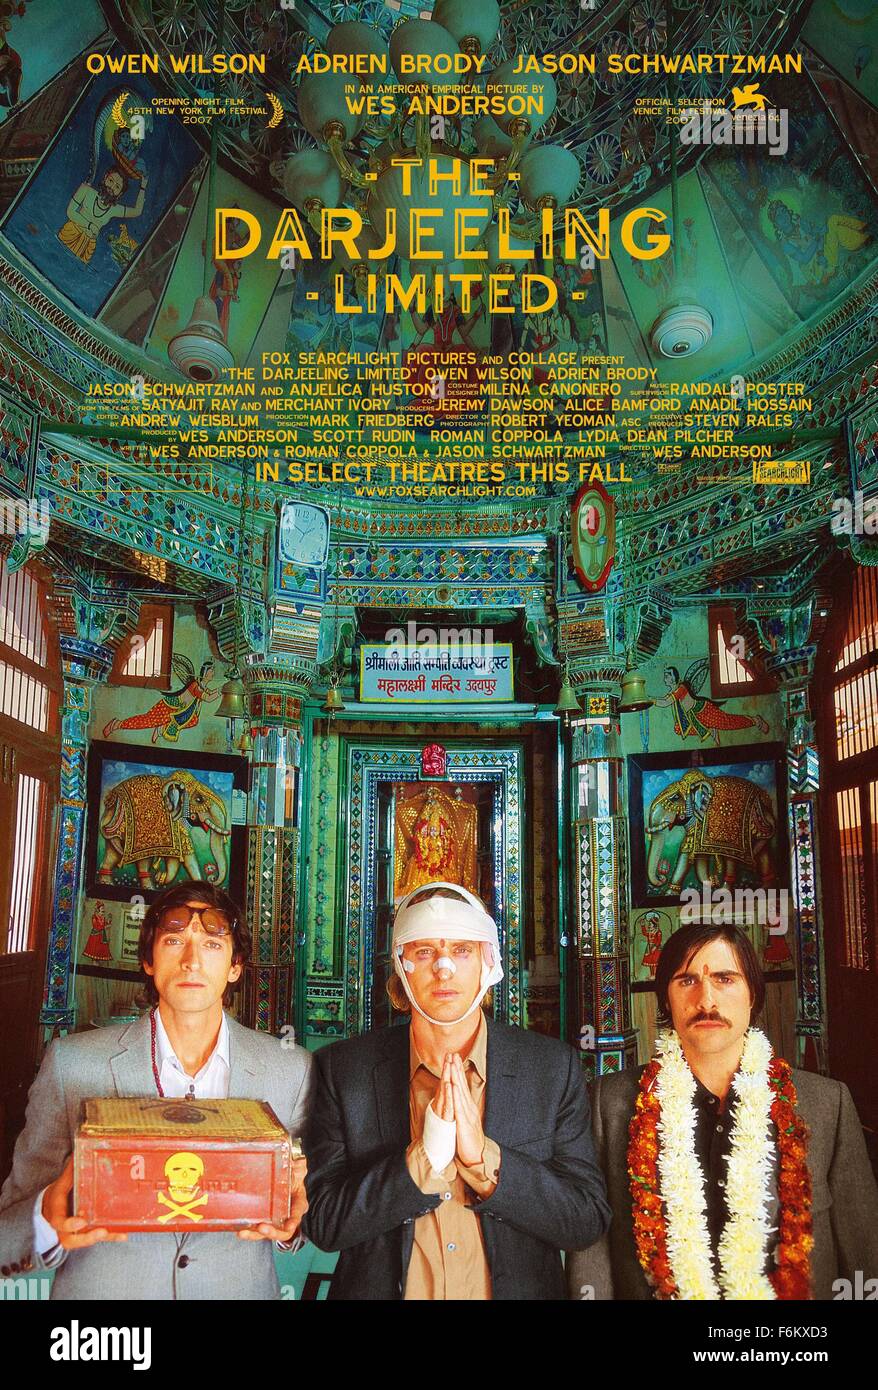 RELEASE DATE: September 29, 2007. MOVIE TITLE: The Darjeeling Limited - STUDIO: American Empirical Pictures/Fox Searchlight Pictures. PLOT: Three American brothers who have not spoken to each other in a year set off on a train voyage across India with a plan to find themselves and bond with each other -- to become brothers again like they used to be. Their 'spiritual quest', however, veers rapidly off-course, and they eventually find themselves stranded alone in the middle of the desert with eleven suitcases, a printer, and a laminating machine. At this moment, a new, unplanned journey suddenl Stock Photo